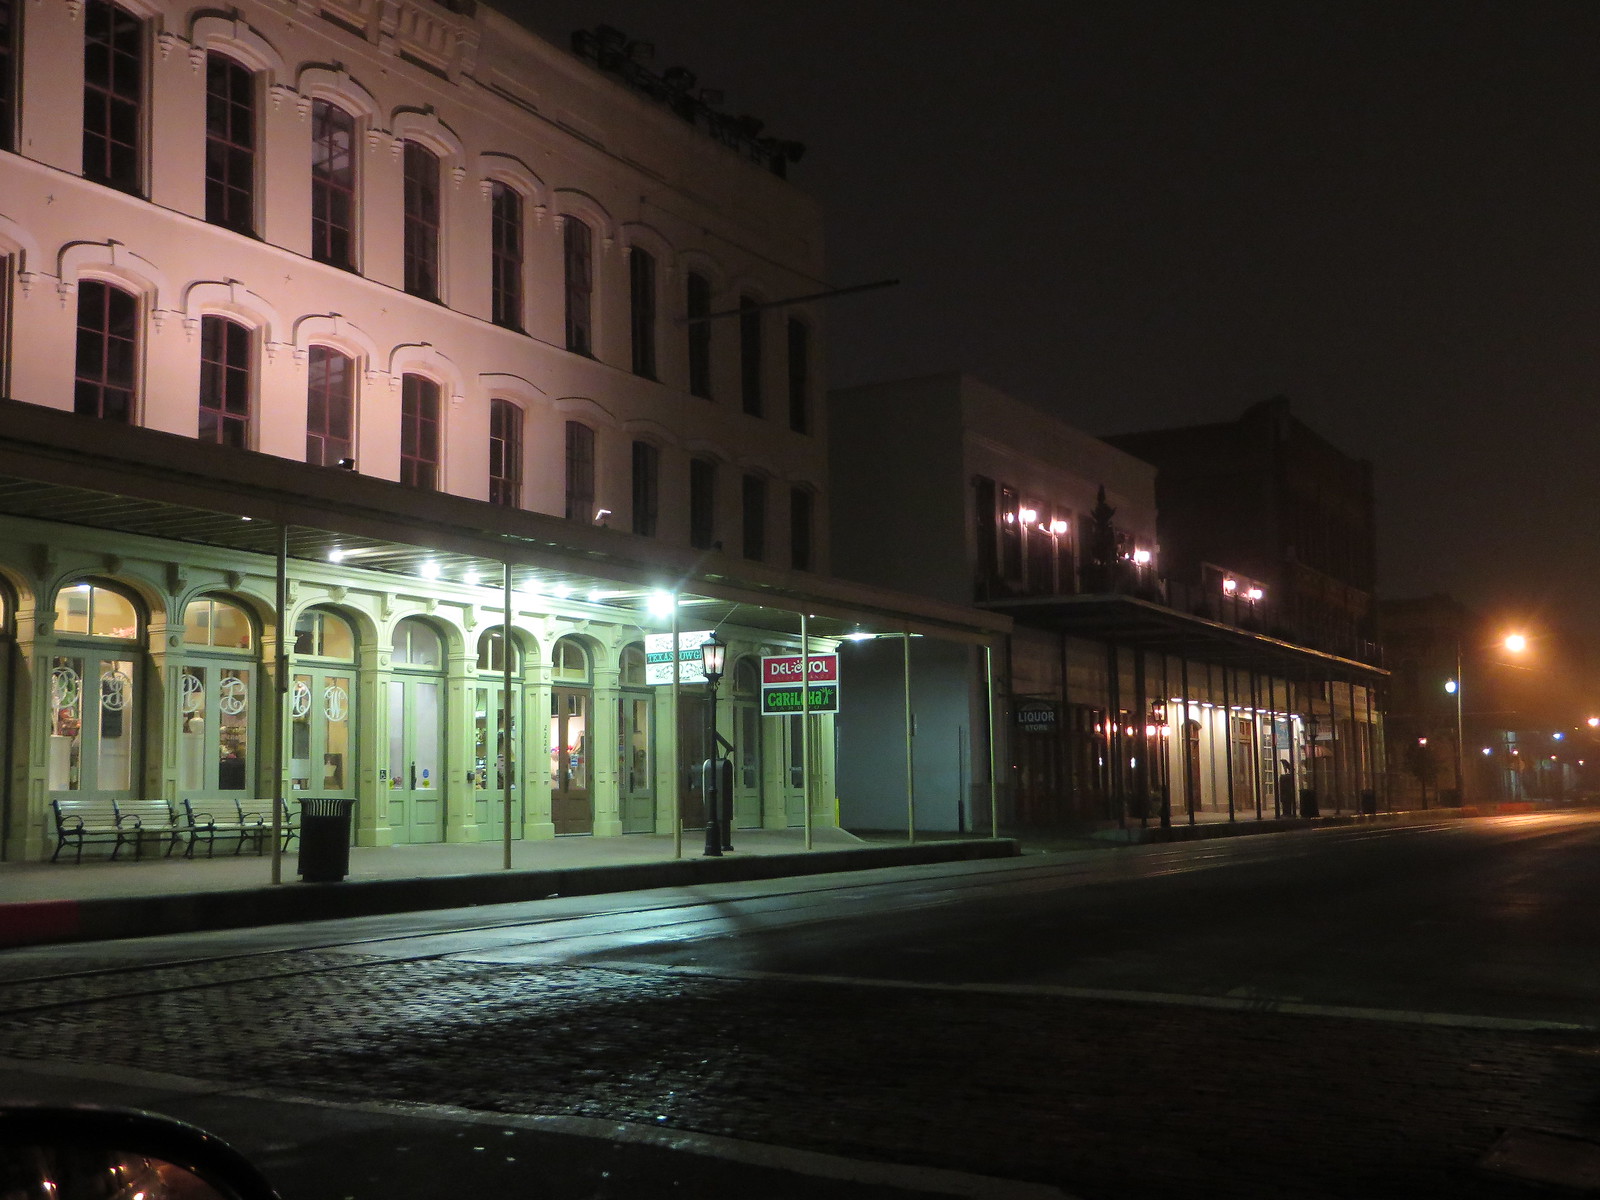 Cold, Foggy, and Empty Night, The Strand Historic District, Galveston, Texas